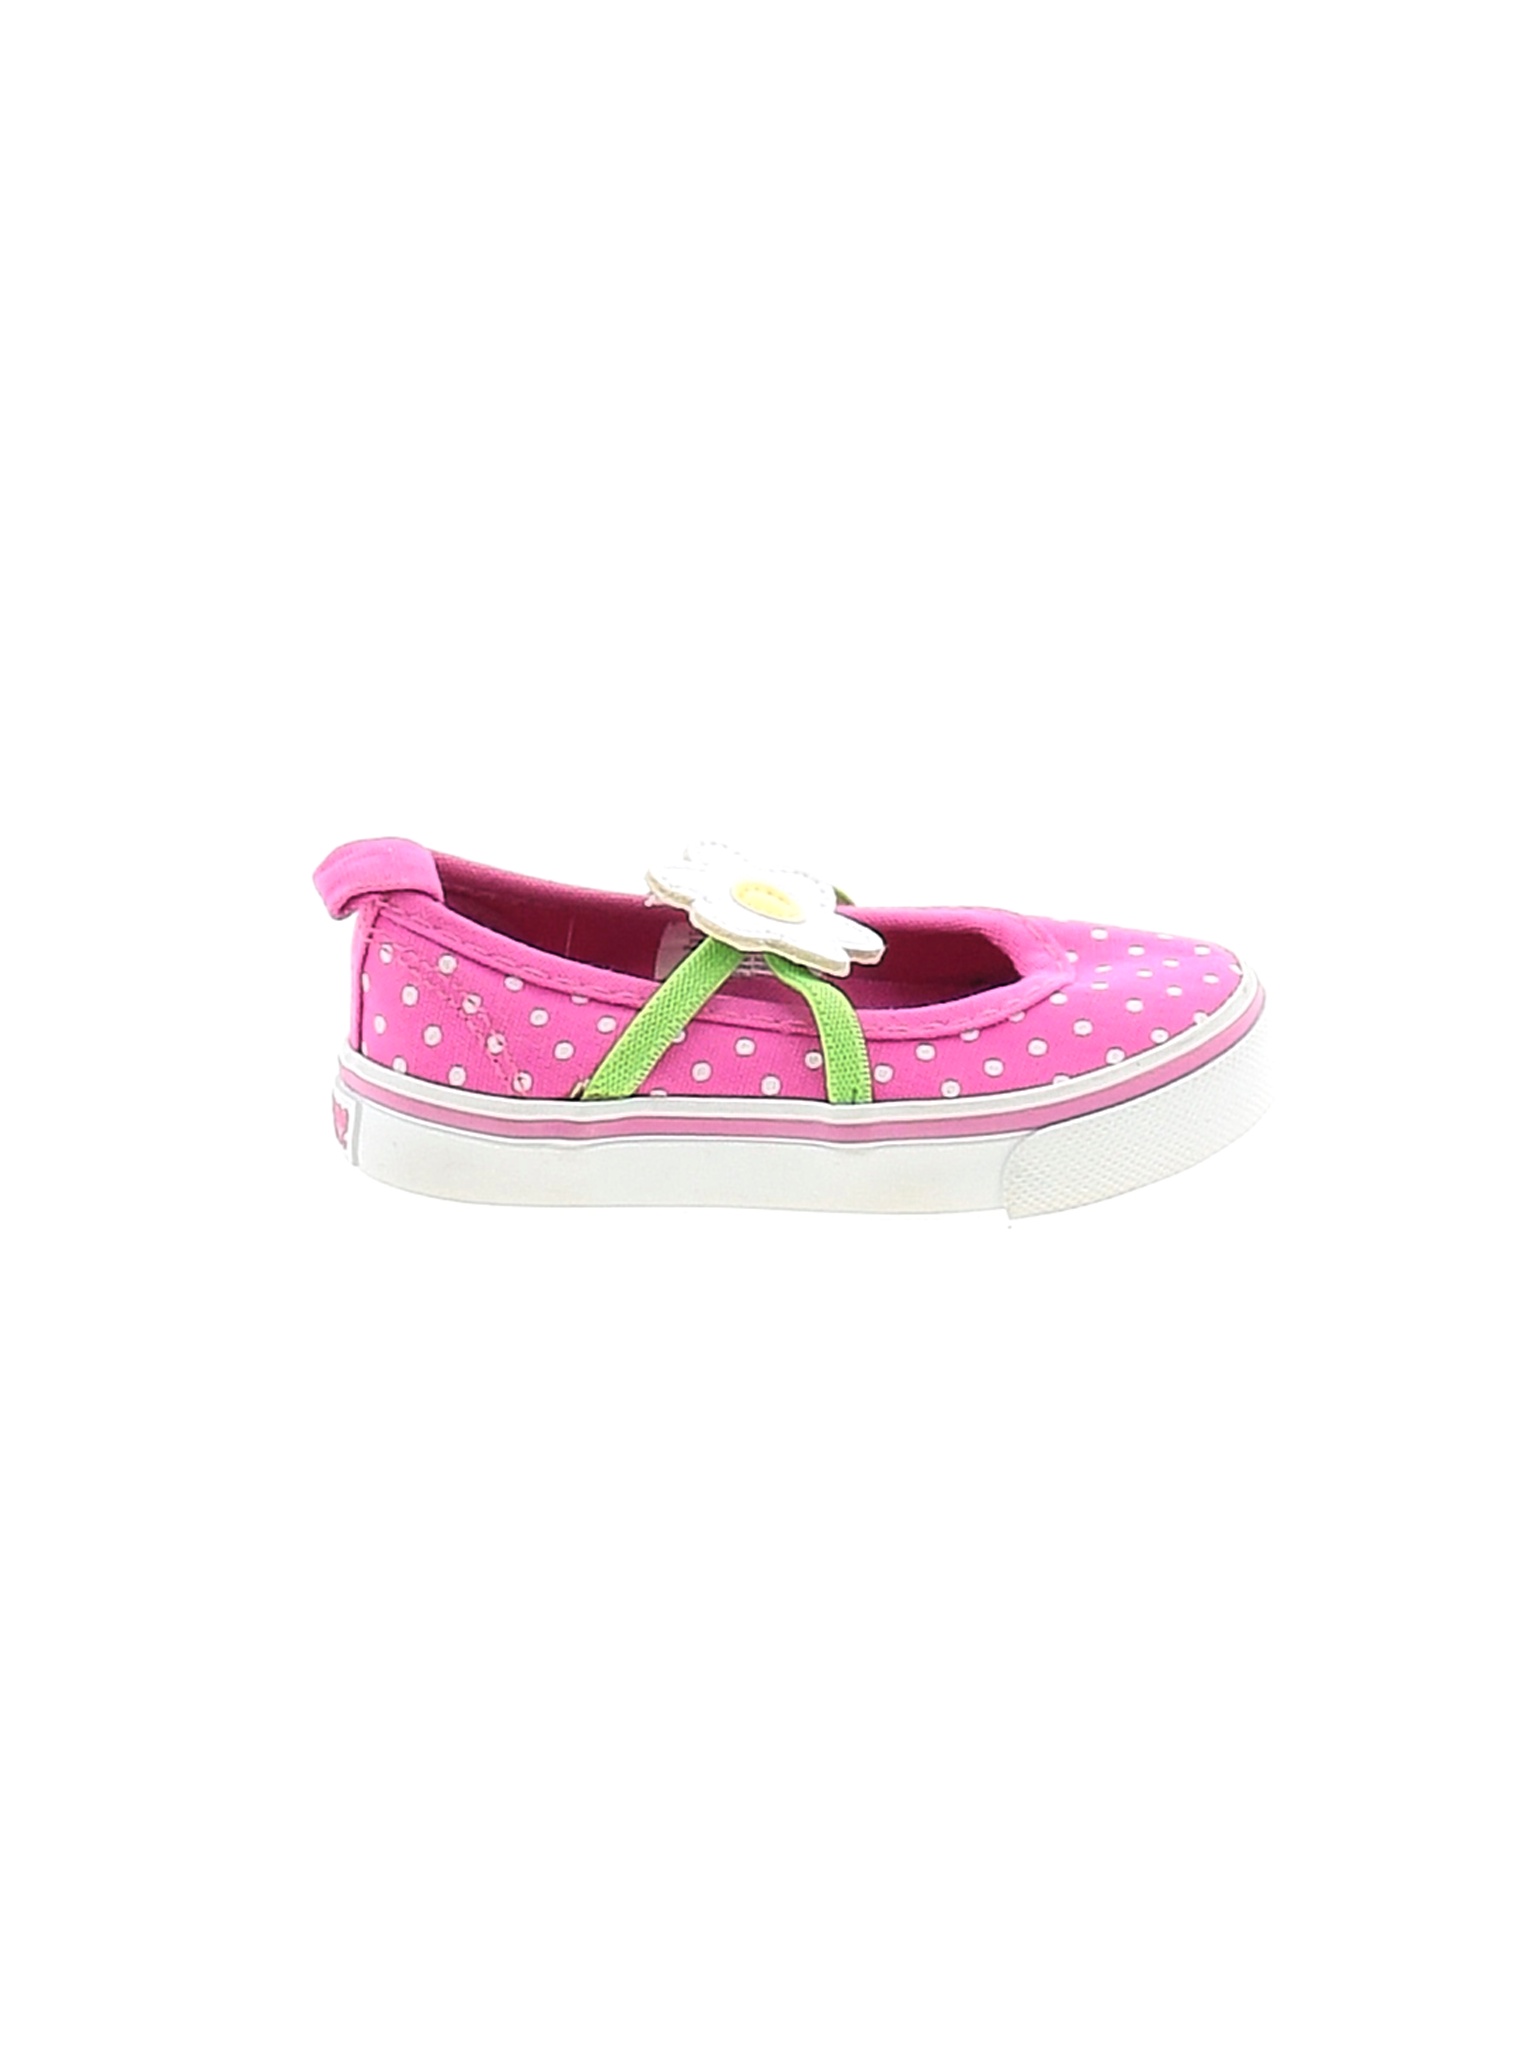 gymboree shoes baby girl